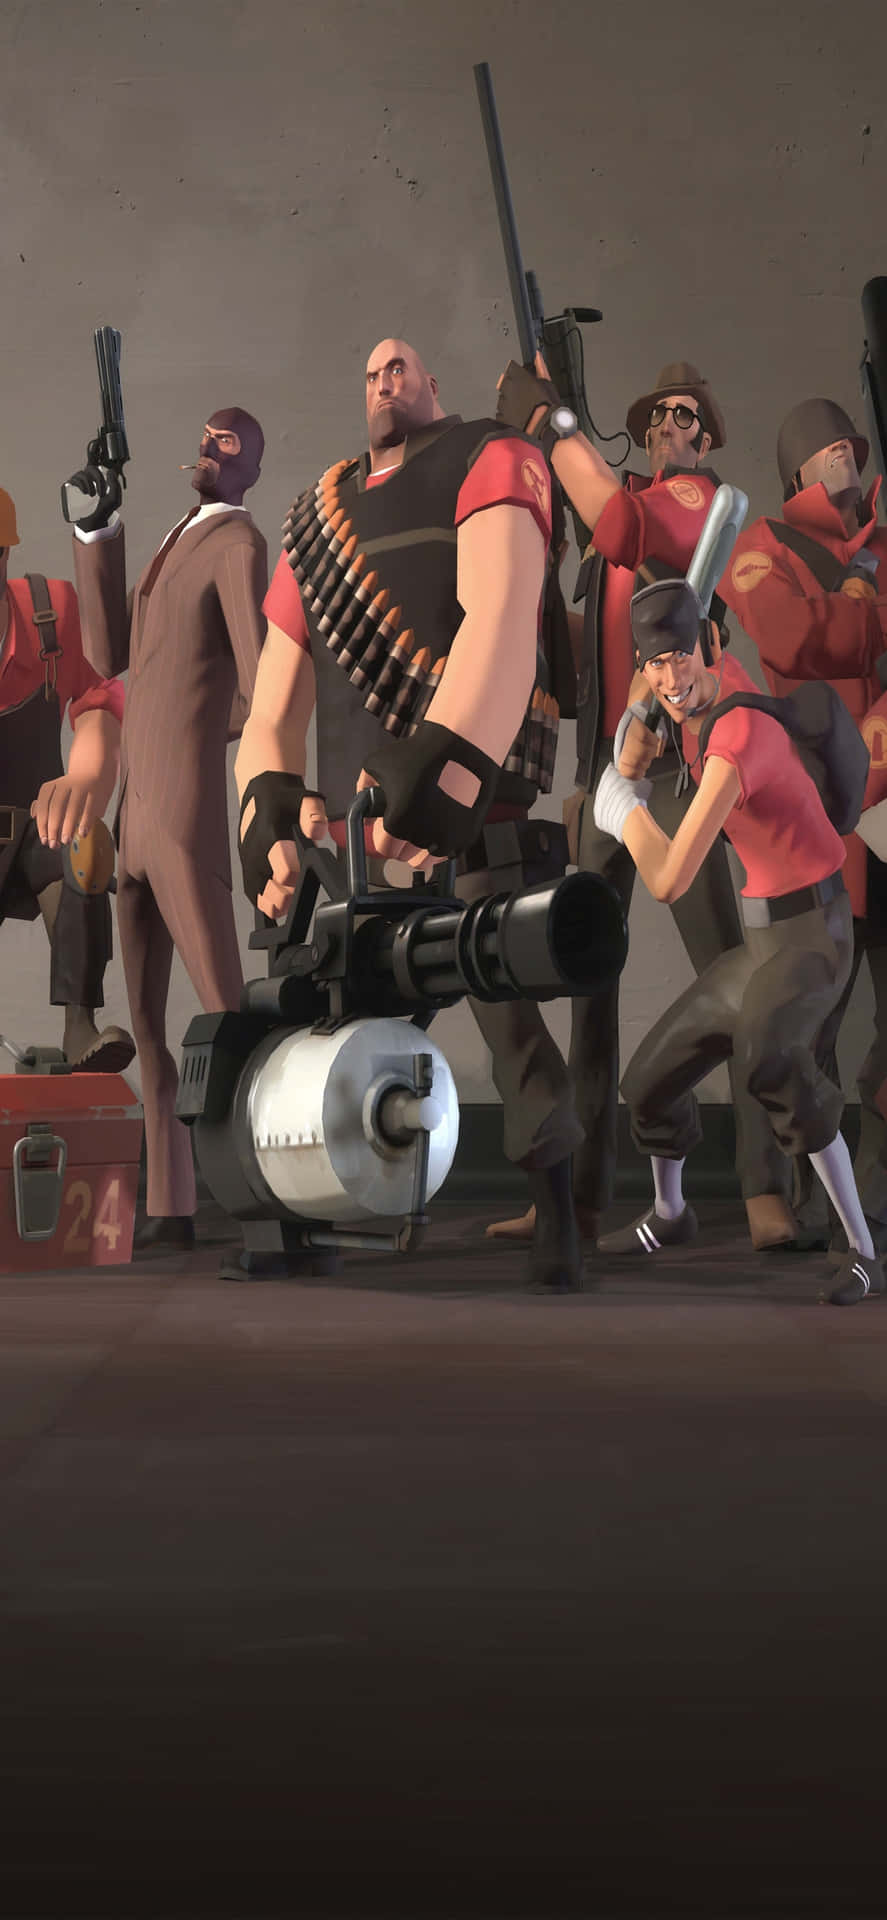 Iphone Xs Tf2 Background Wallpaper